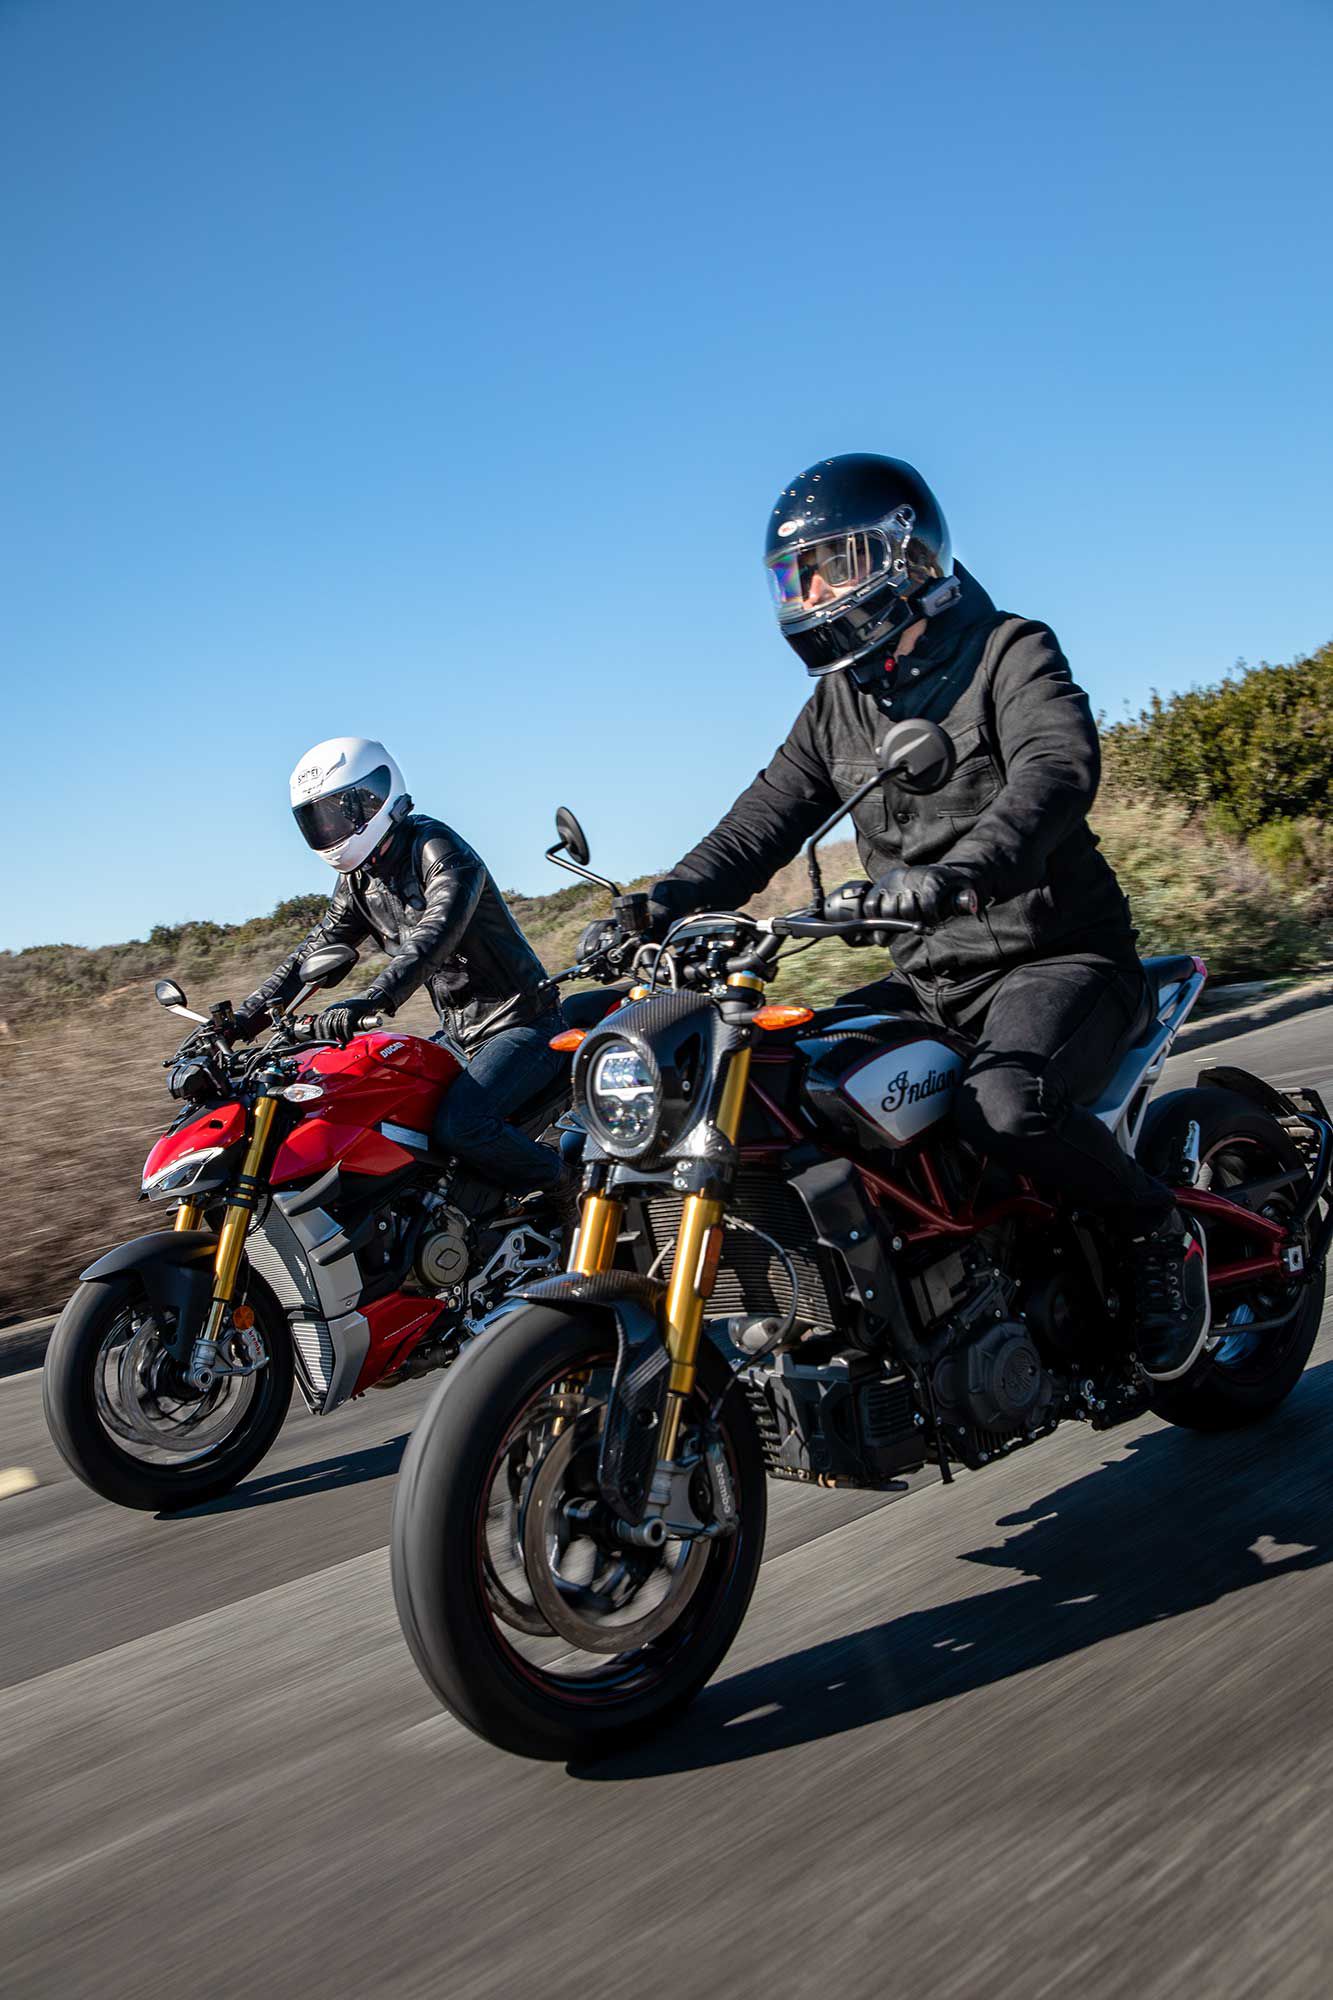 Improved functionality makes it easier than ever to stay in contact with your riding pals.